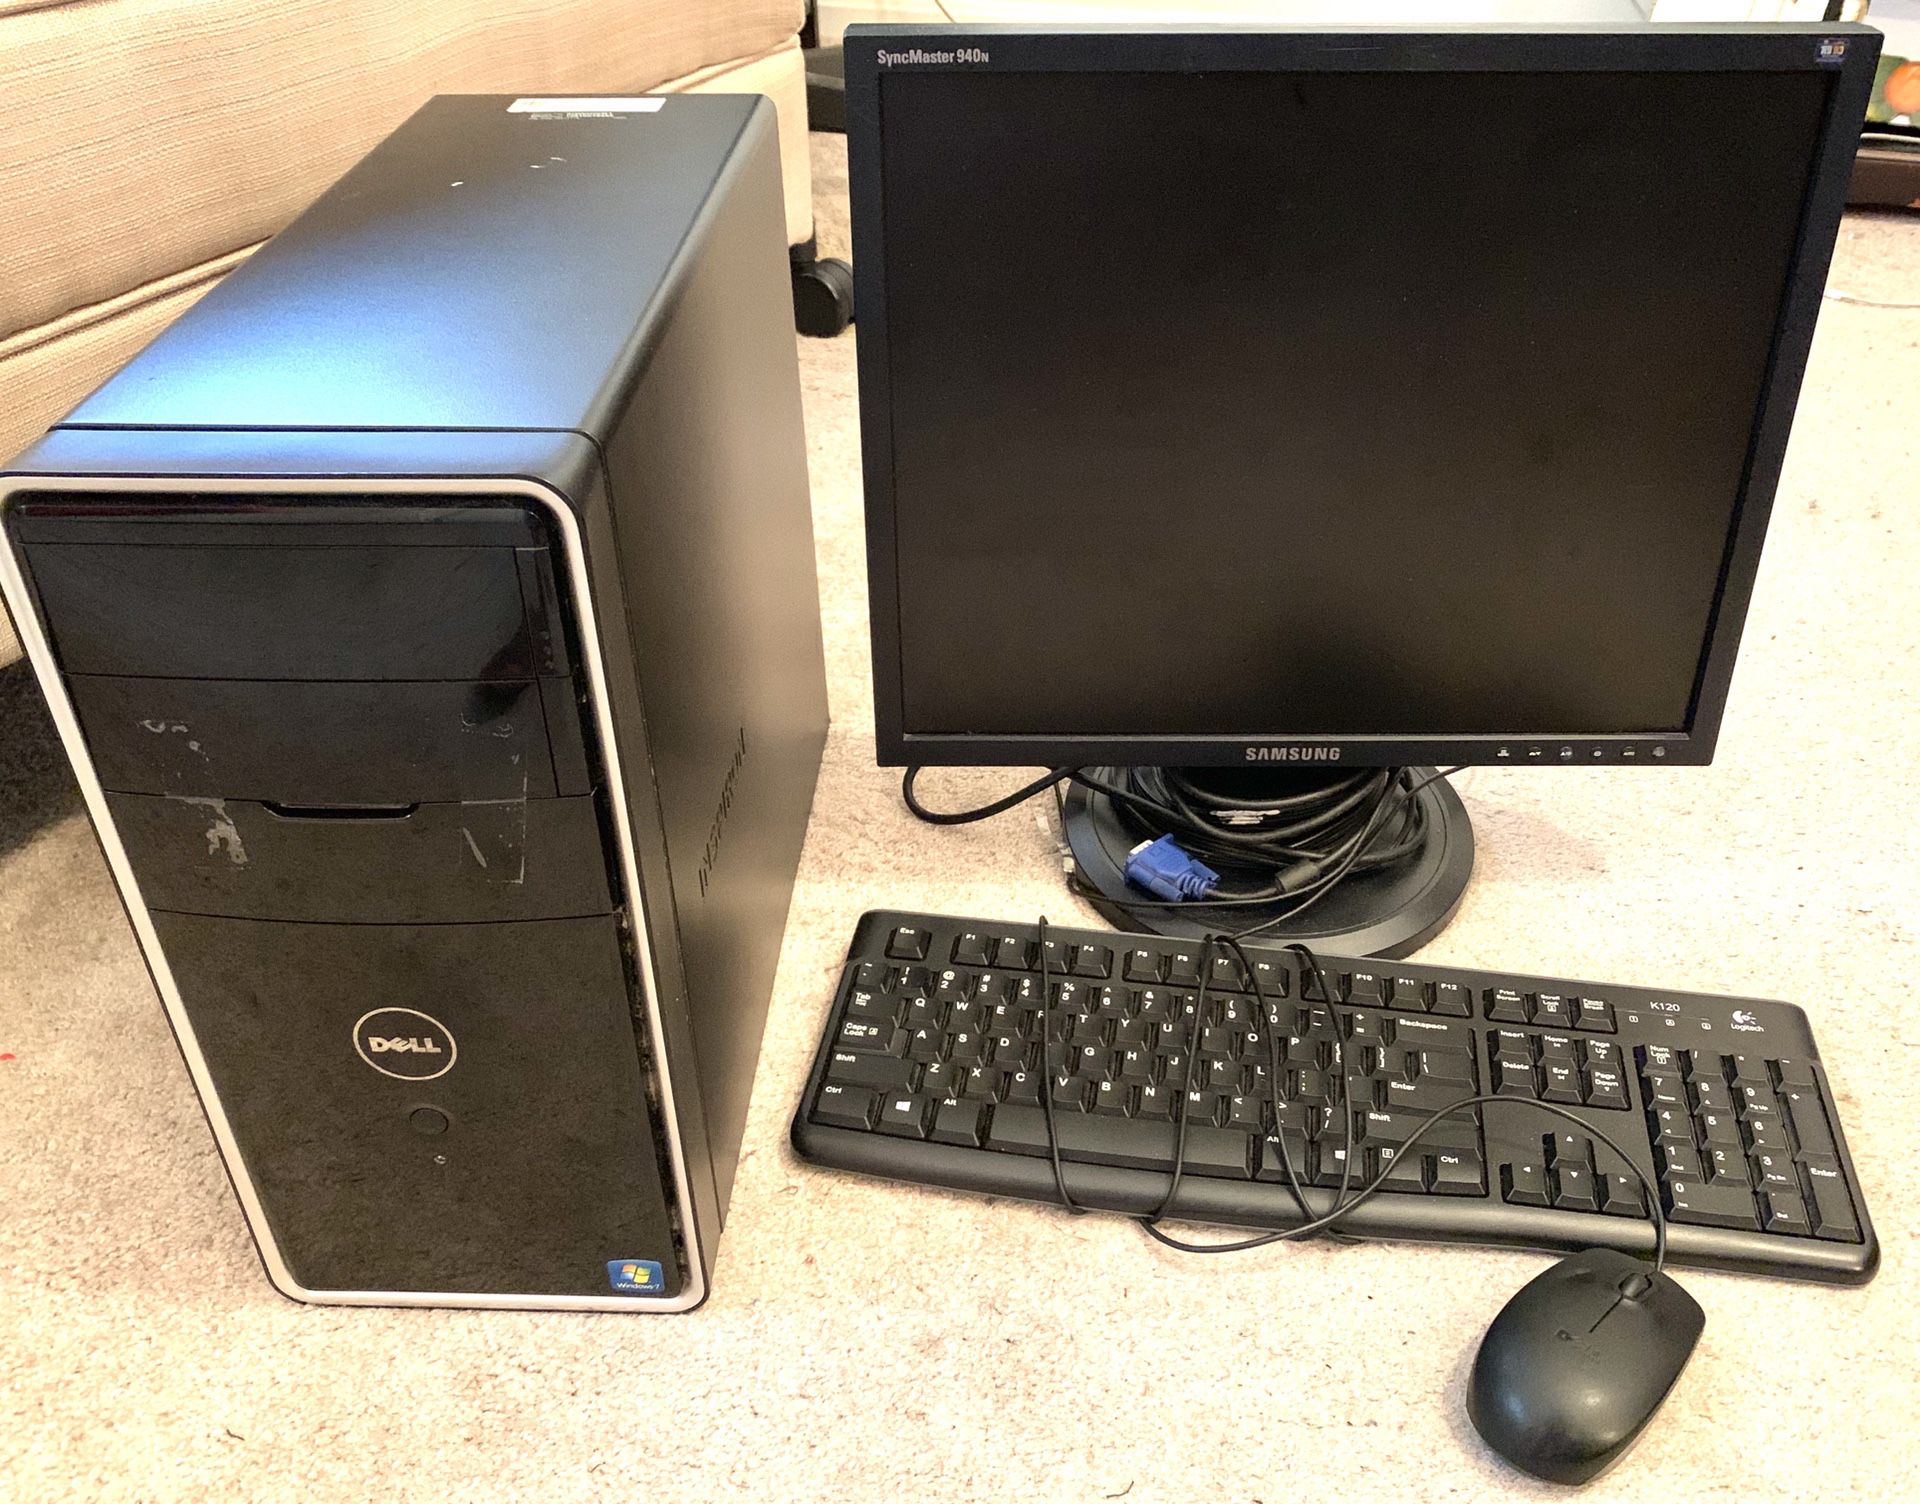 Dell Inspiron 570 Desktop Computer with 17 in monitor, keyboard, and usb mouse.